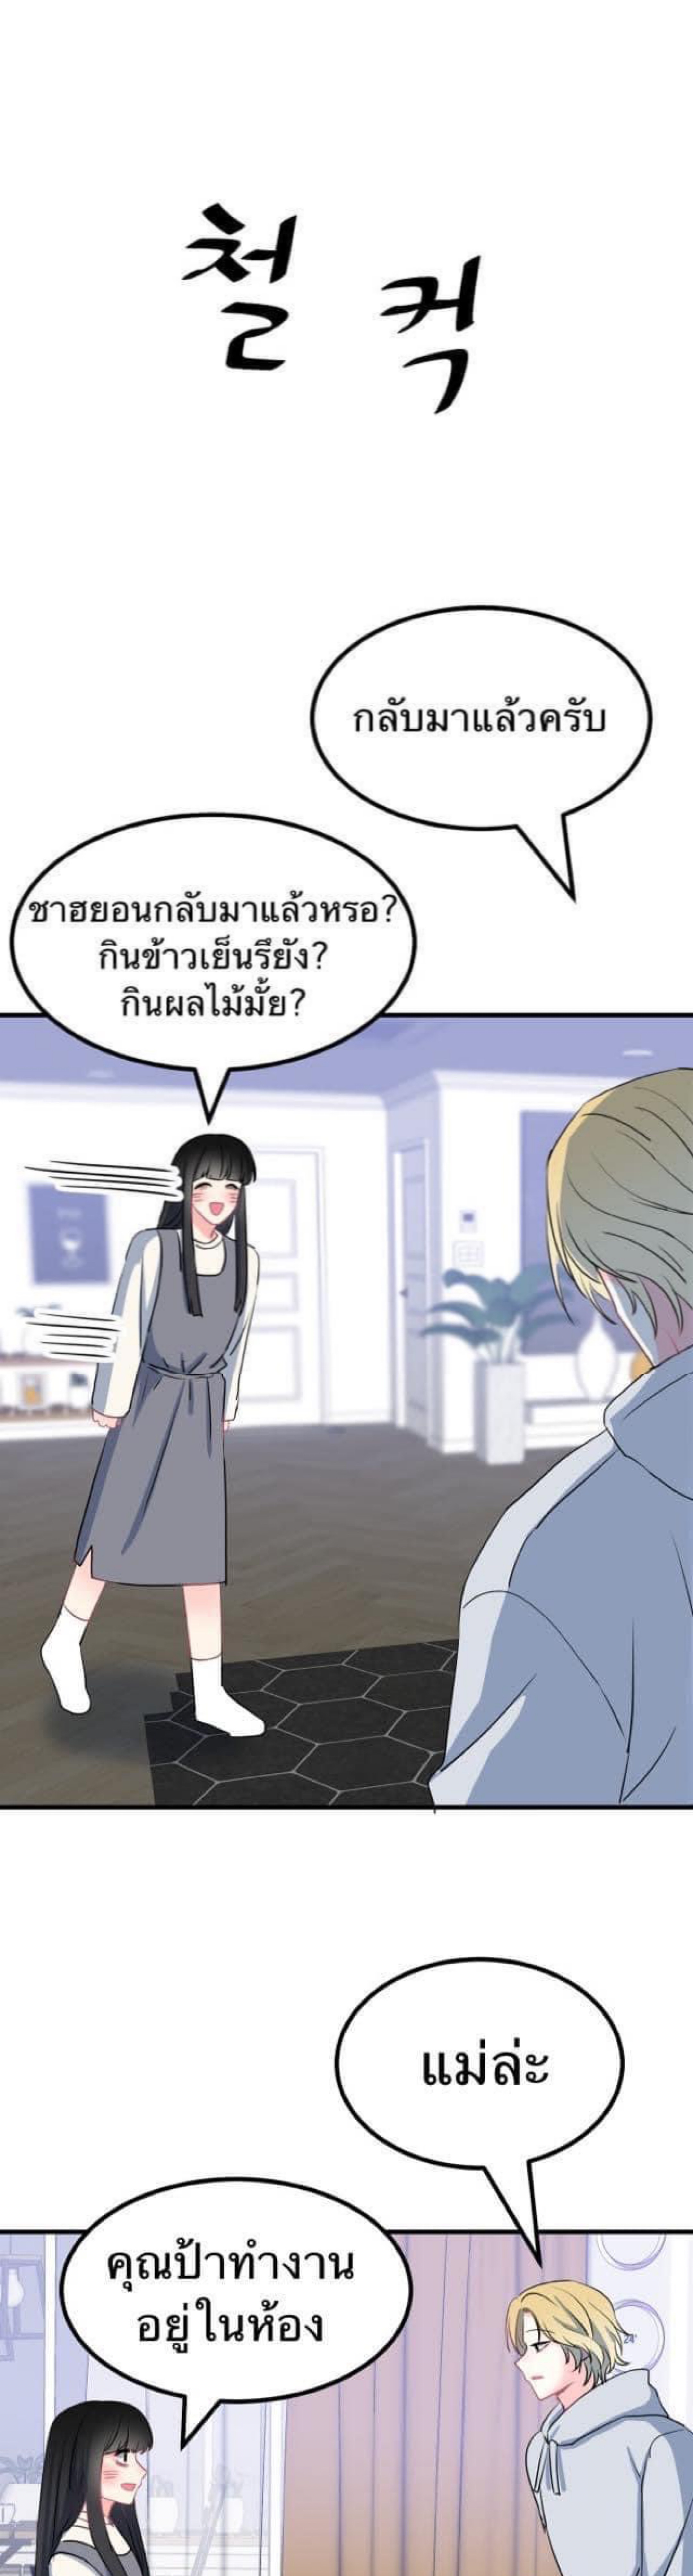 Mary’s Burning Circuit of Happiness ตอนที่ 3